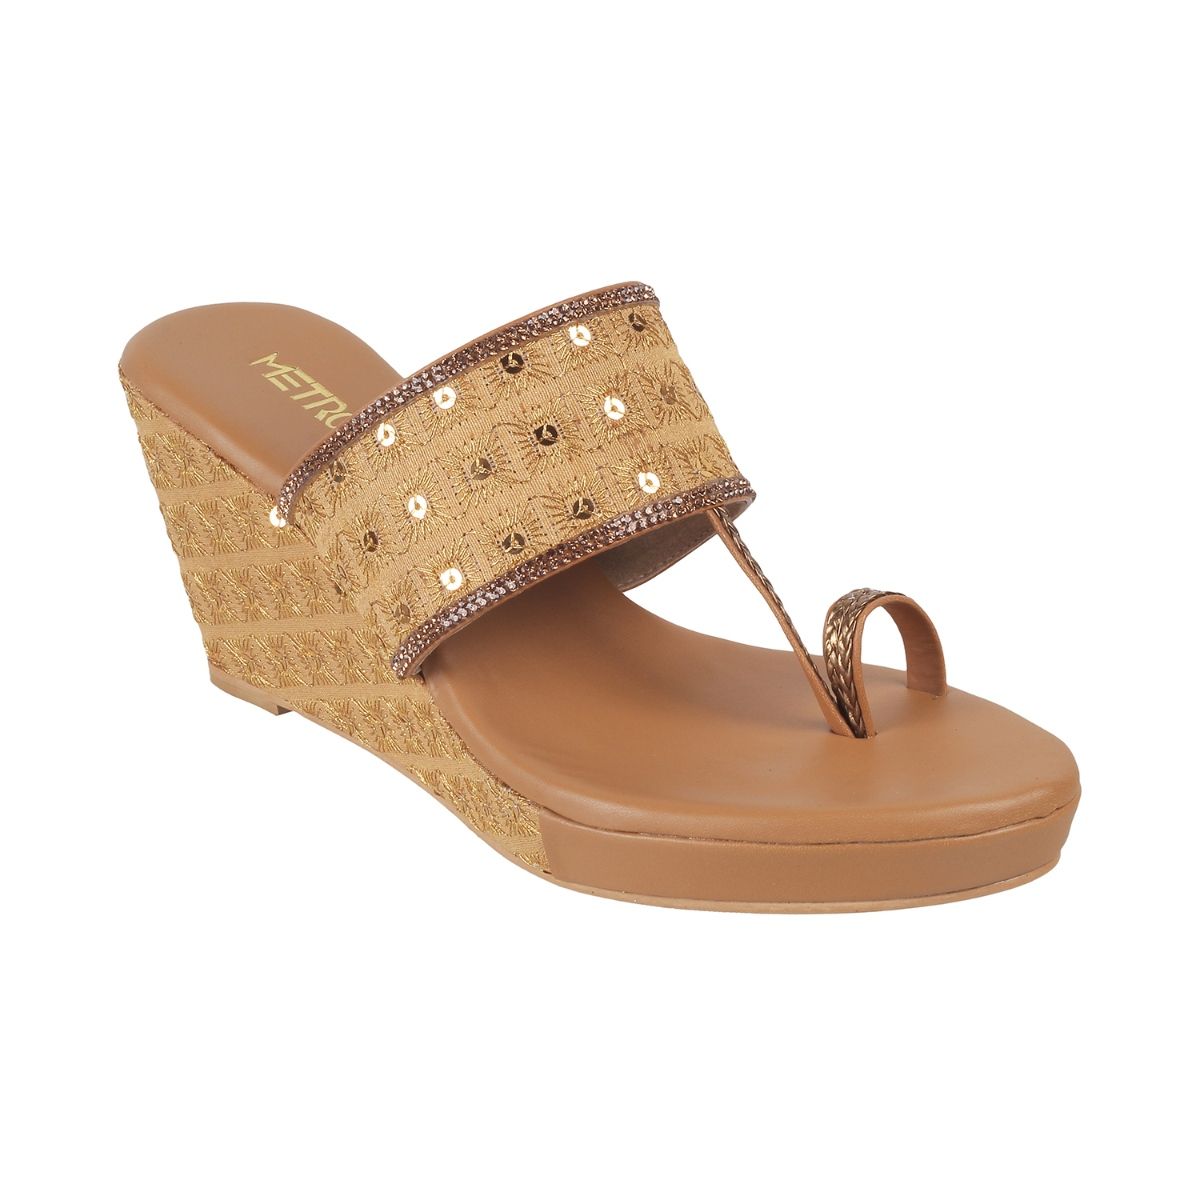 Women's Wedges | Explore our New Arrivals | ZARA Philippines